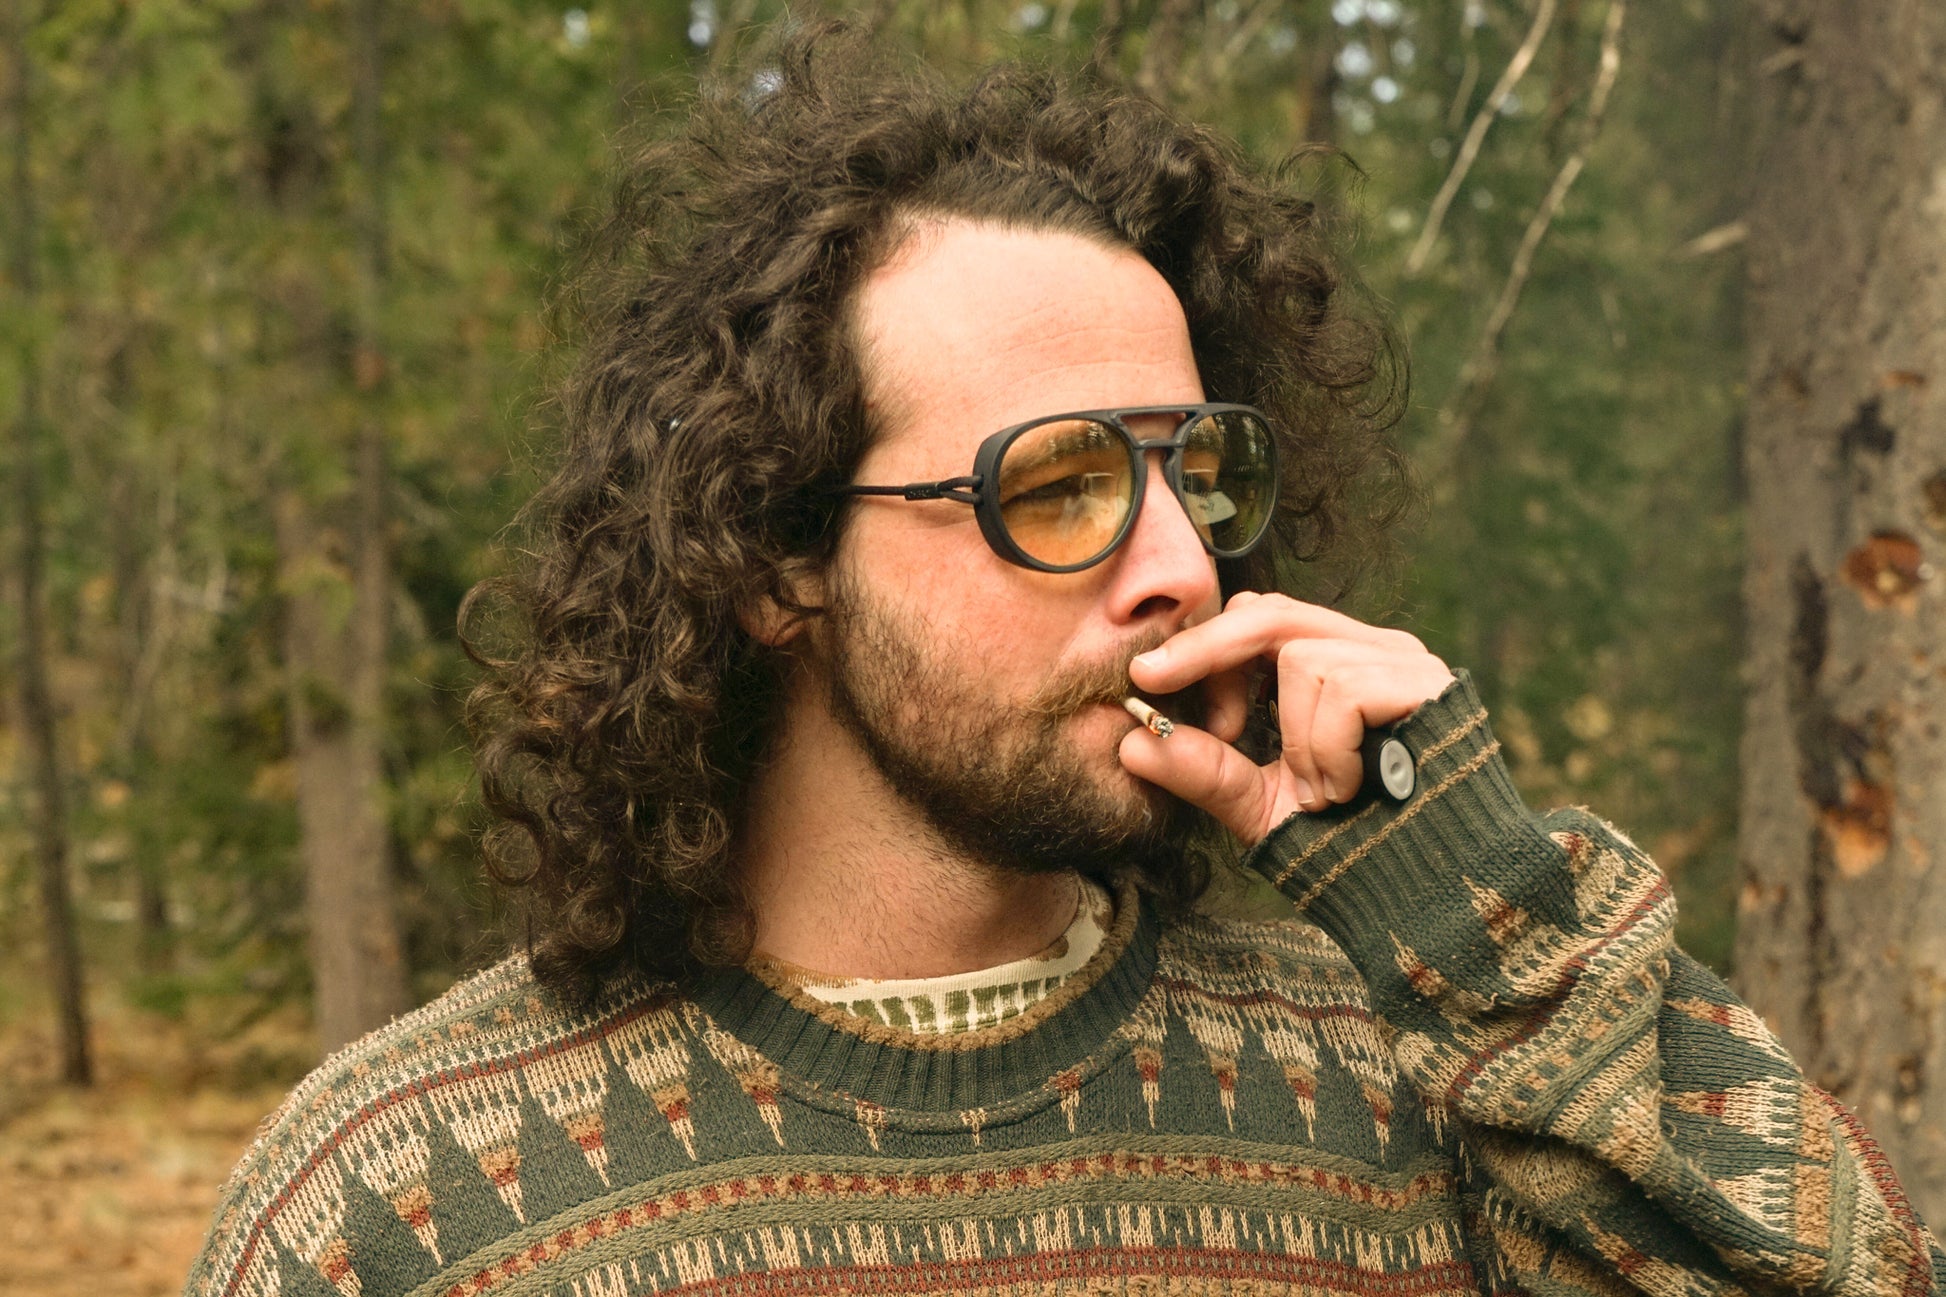 dolomite_tortoise_blocker Man in the forest smoking wearing Ombraz blue blocking armless rope sunglasses